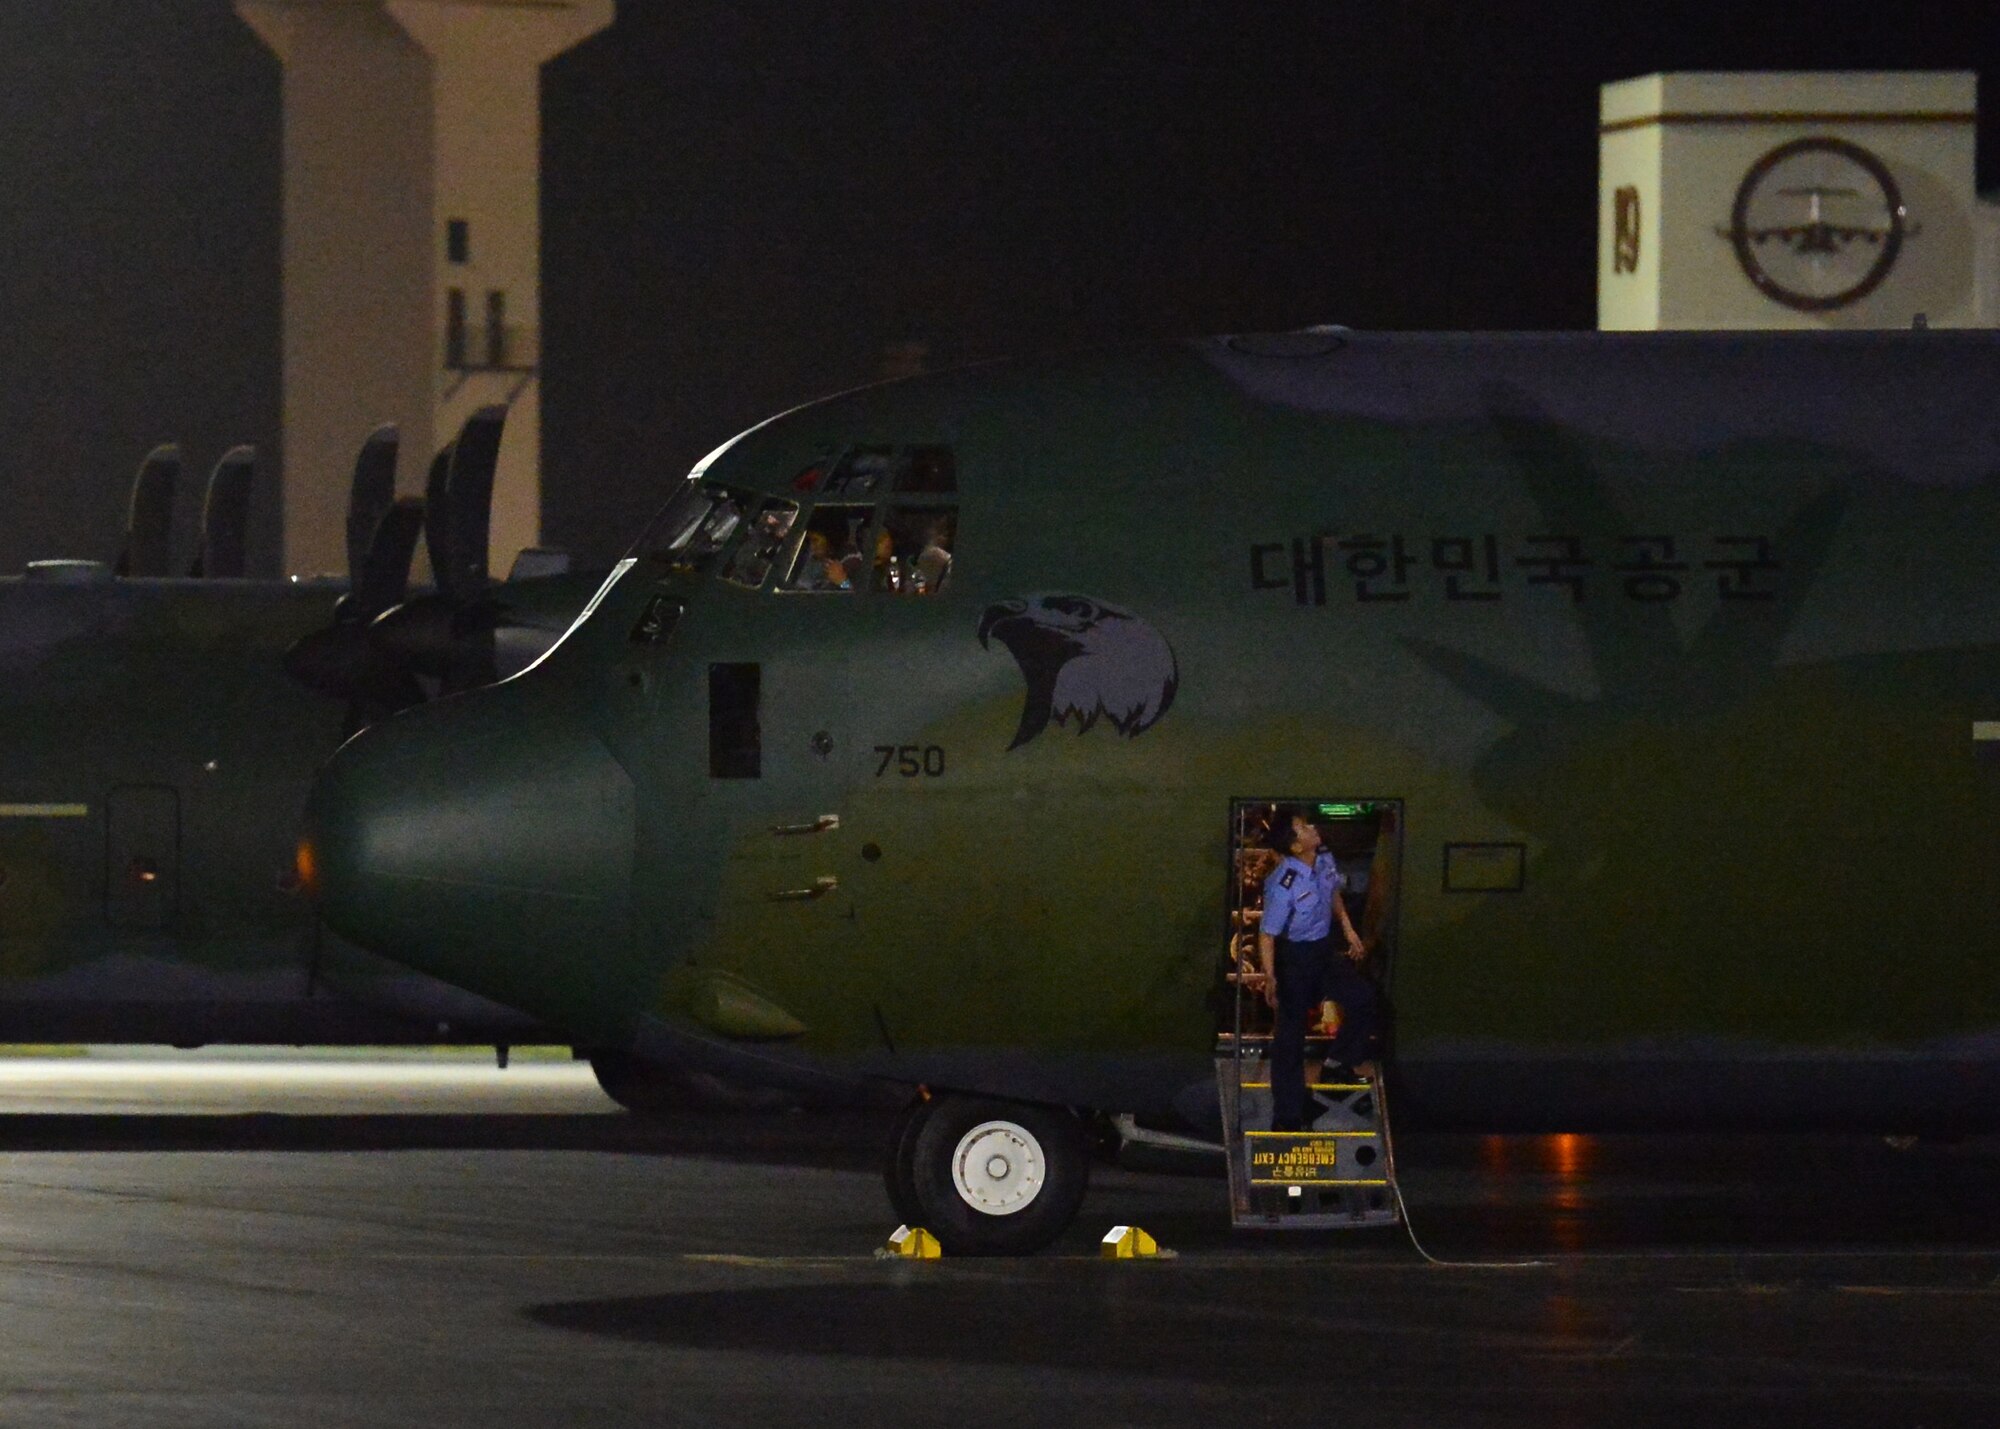 A member of the Republic of Korea Air Force exits a ROKAF C-130 shortly after landing on Joint Base Pearl Harbor-Hickam, Hawaii, Nov. 10, 2015. This is the first ever visit by the ROKAF academy cadets to Hawaii. This visit is designed to strengthen the alliance between the U.S. and ROK’s future leaders. (U.S. Air Force photo by Tech. Sgt. Aaron Oelrich/Released)